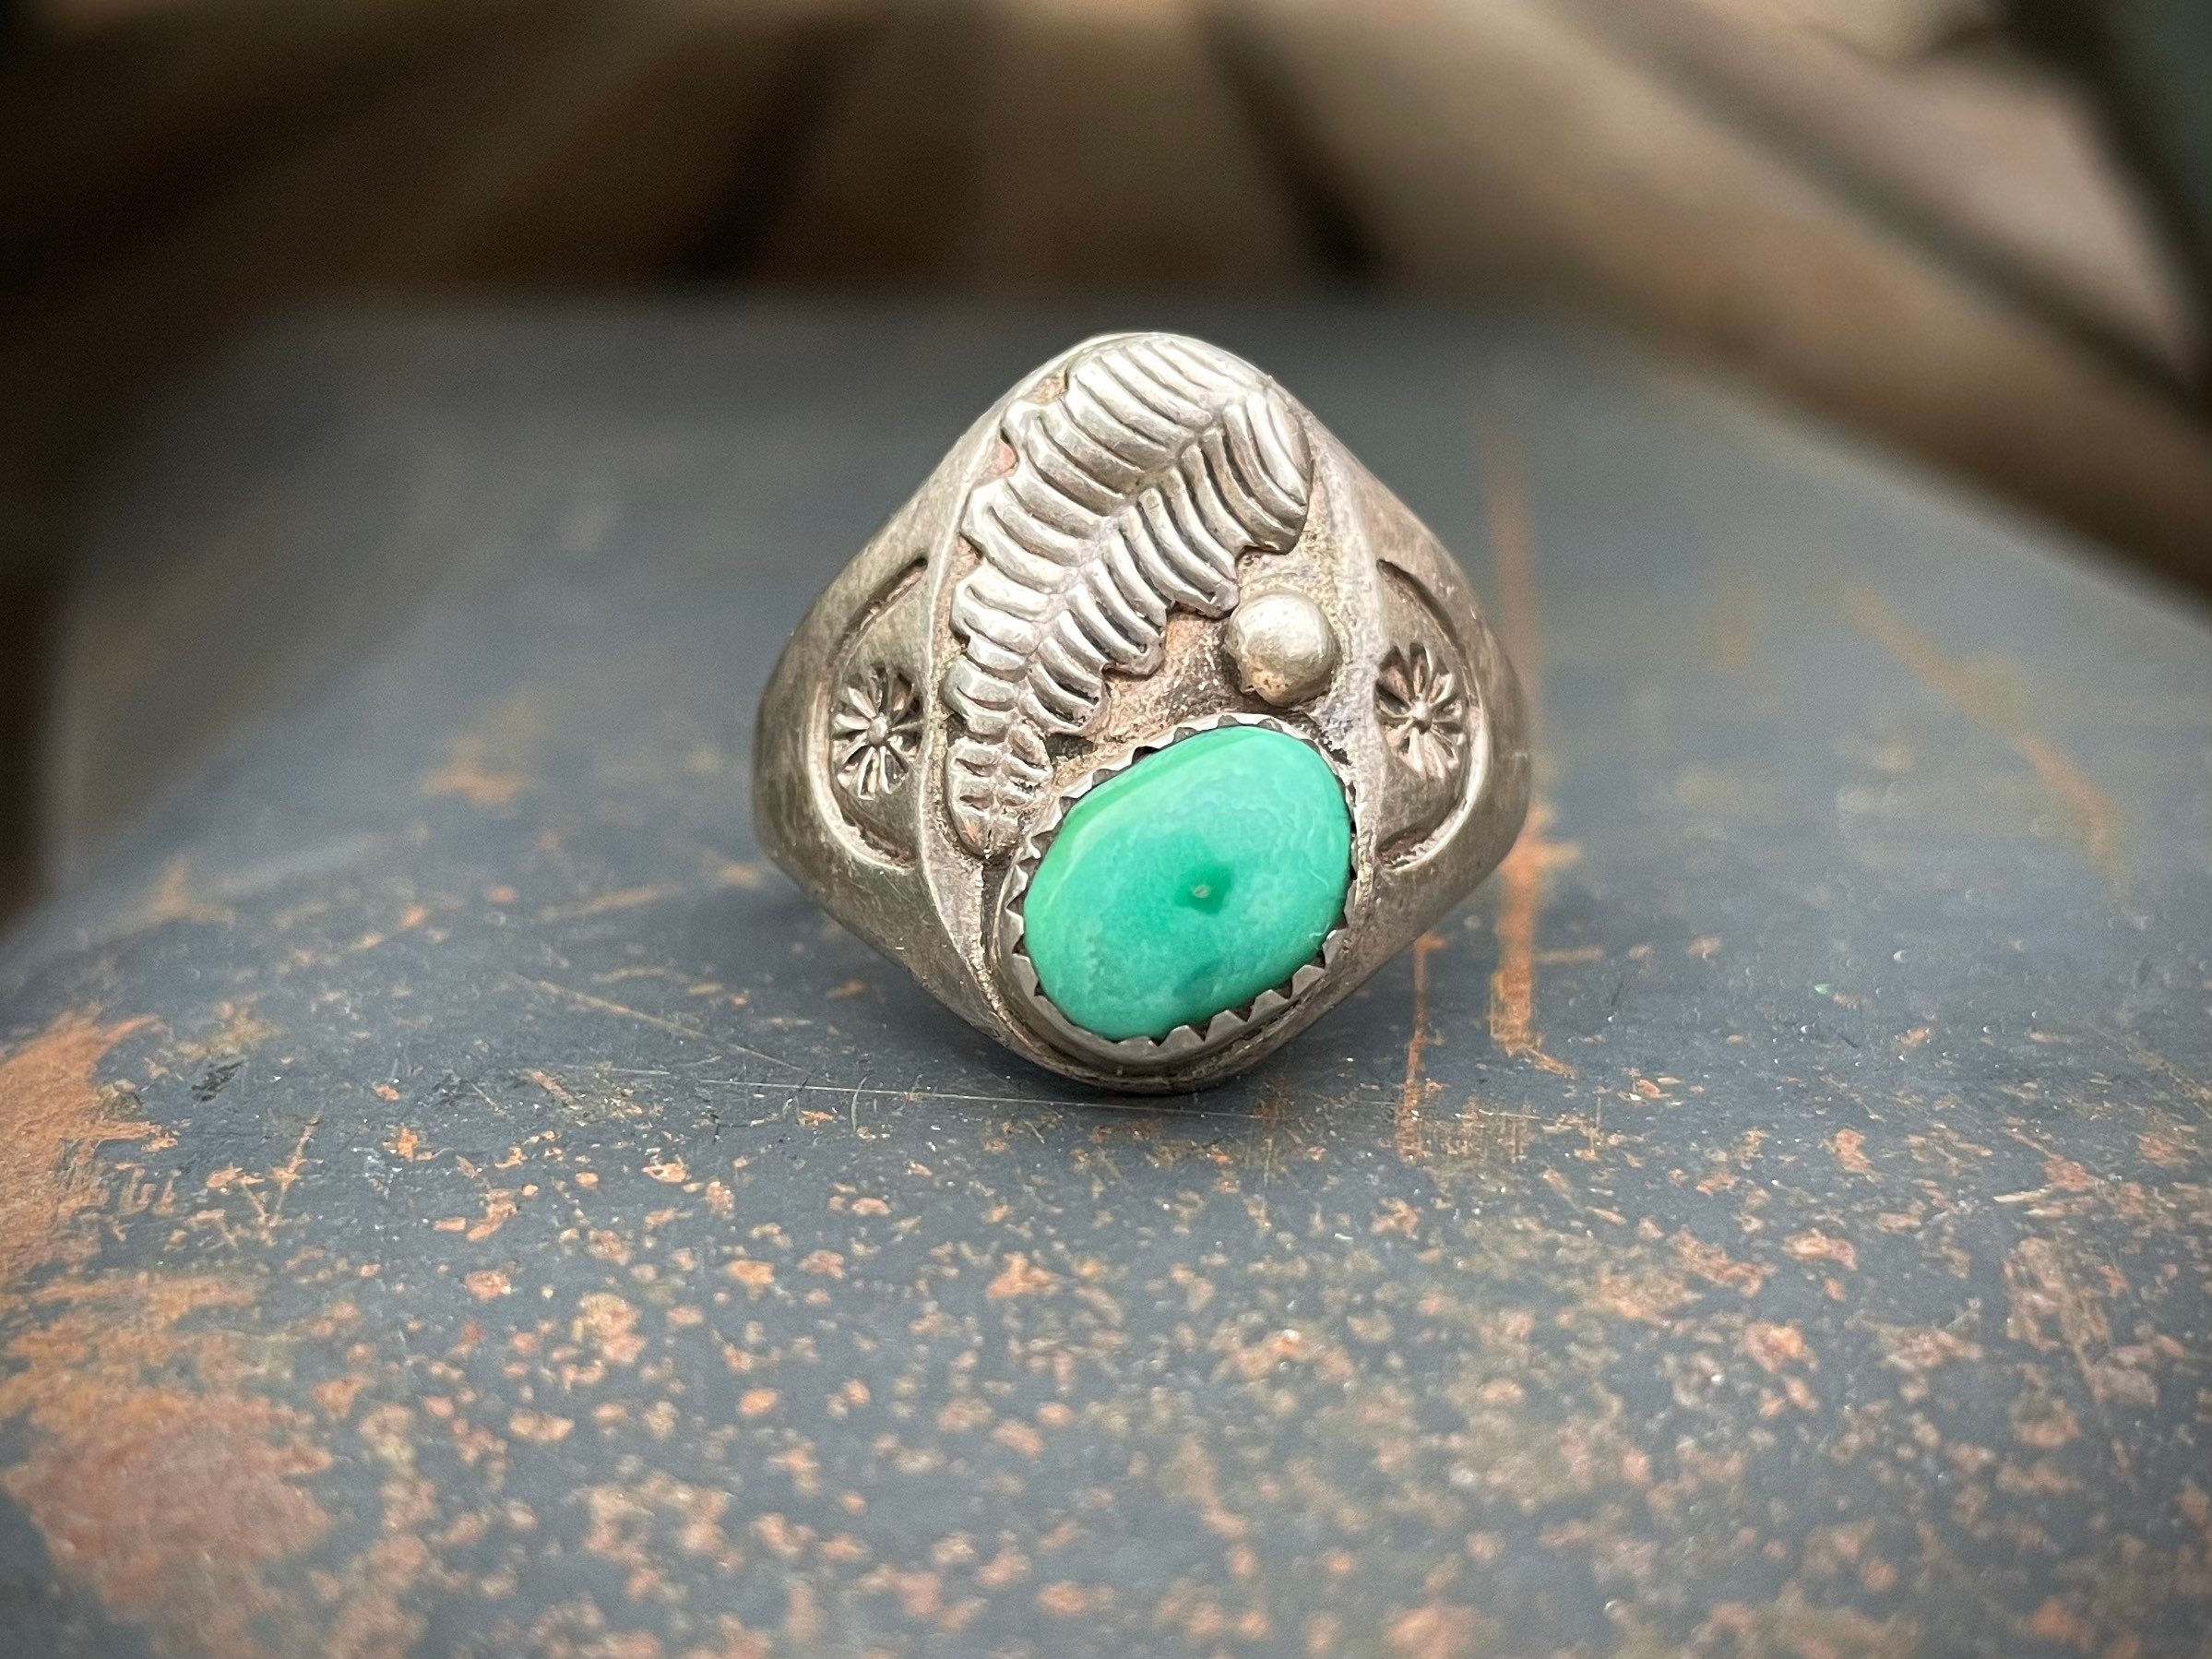 Details about   Exquisite Turquoise Ring Marked April 1975 Fortunate Eagle Signed 10.7 Grams 